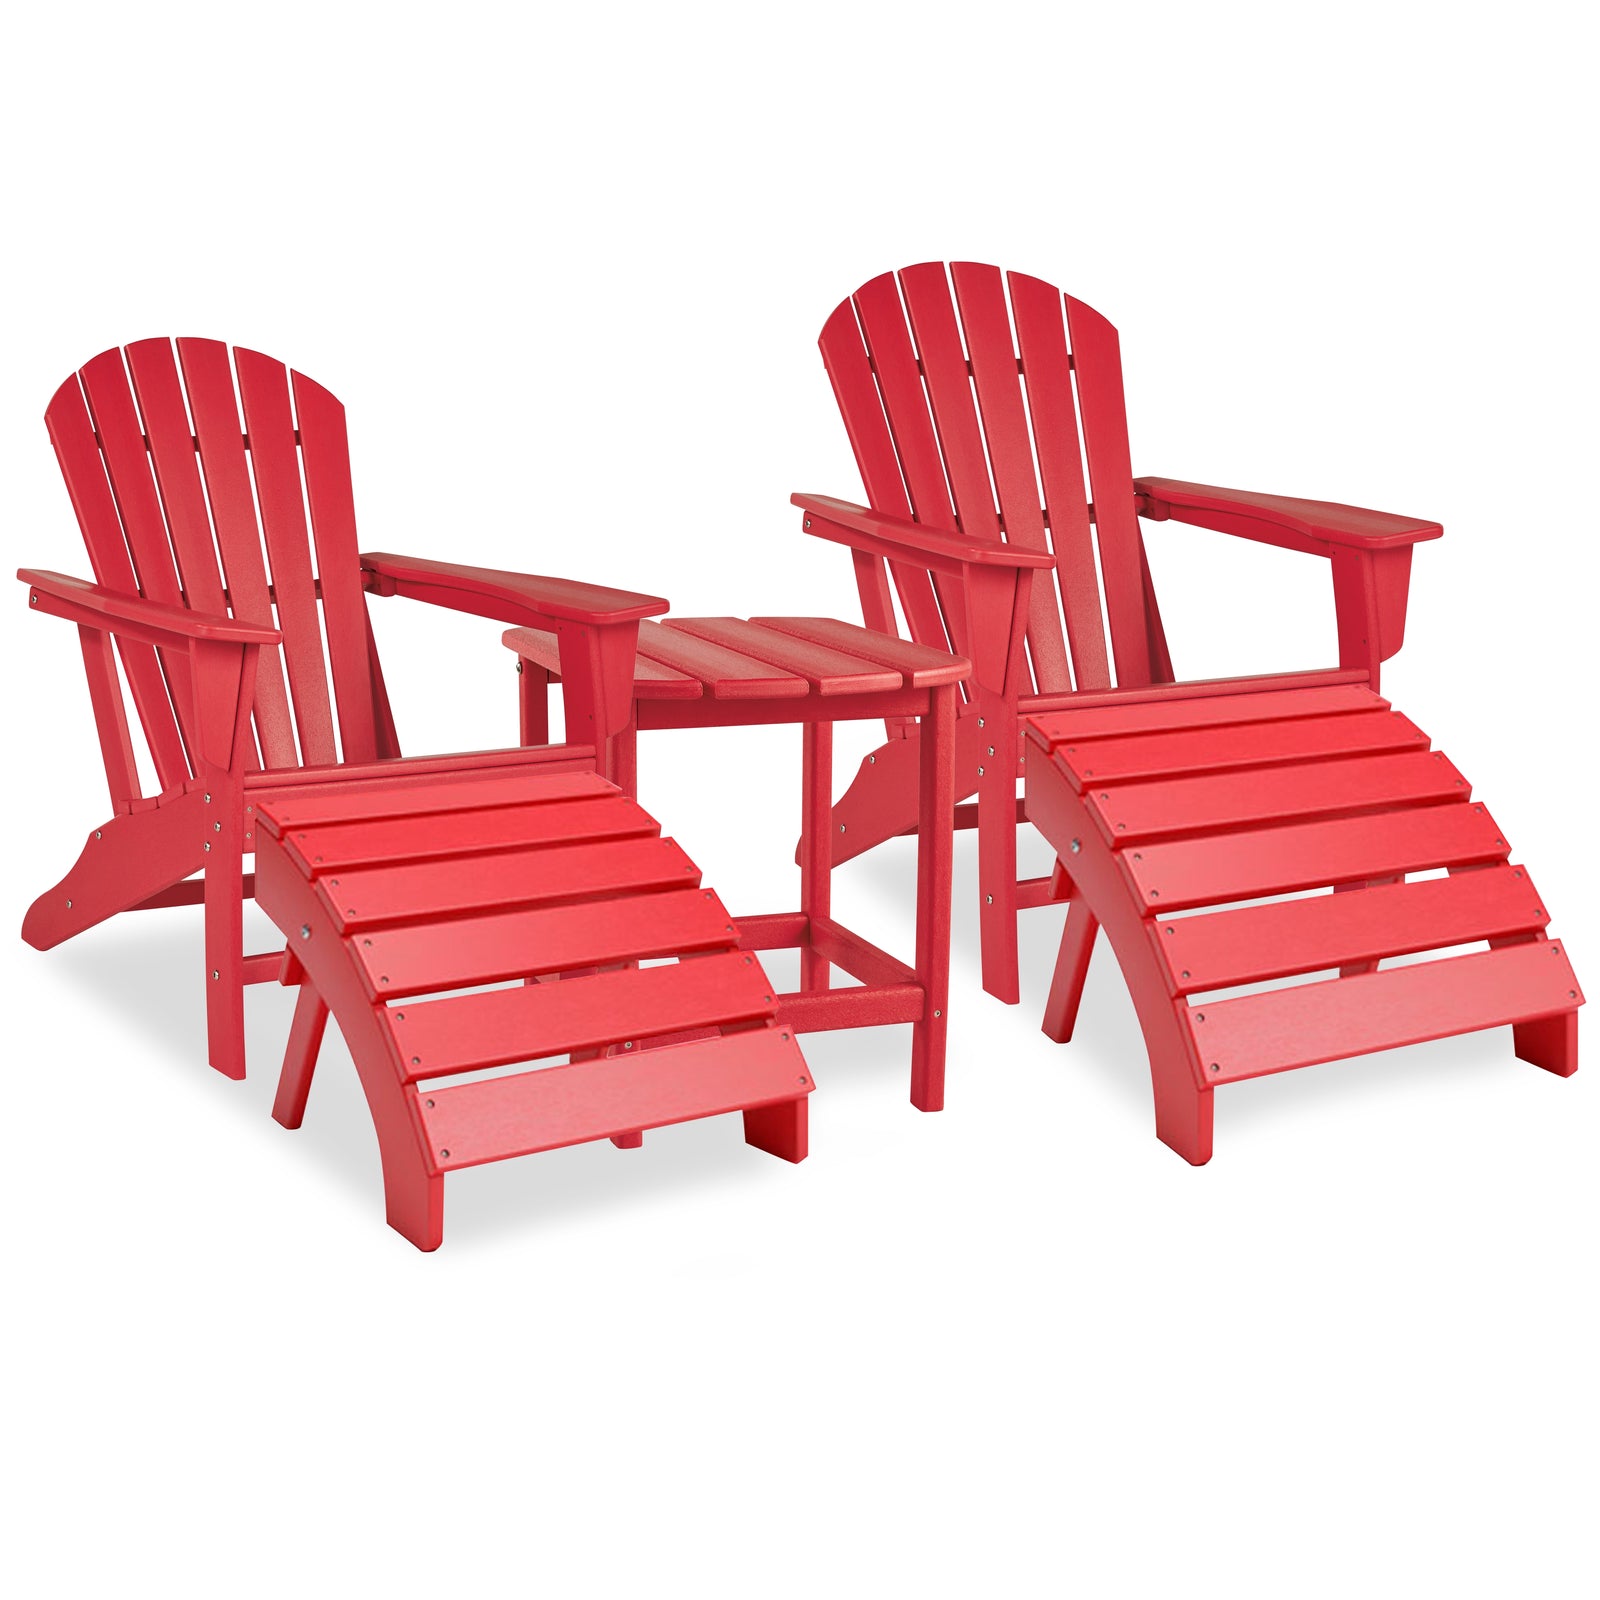 Sundown Red Treasure 2 Outdoor Adirondack Chairs And Ottomans With Side Table